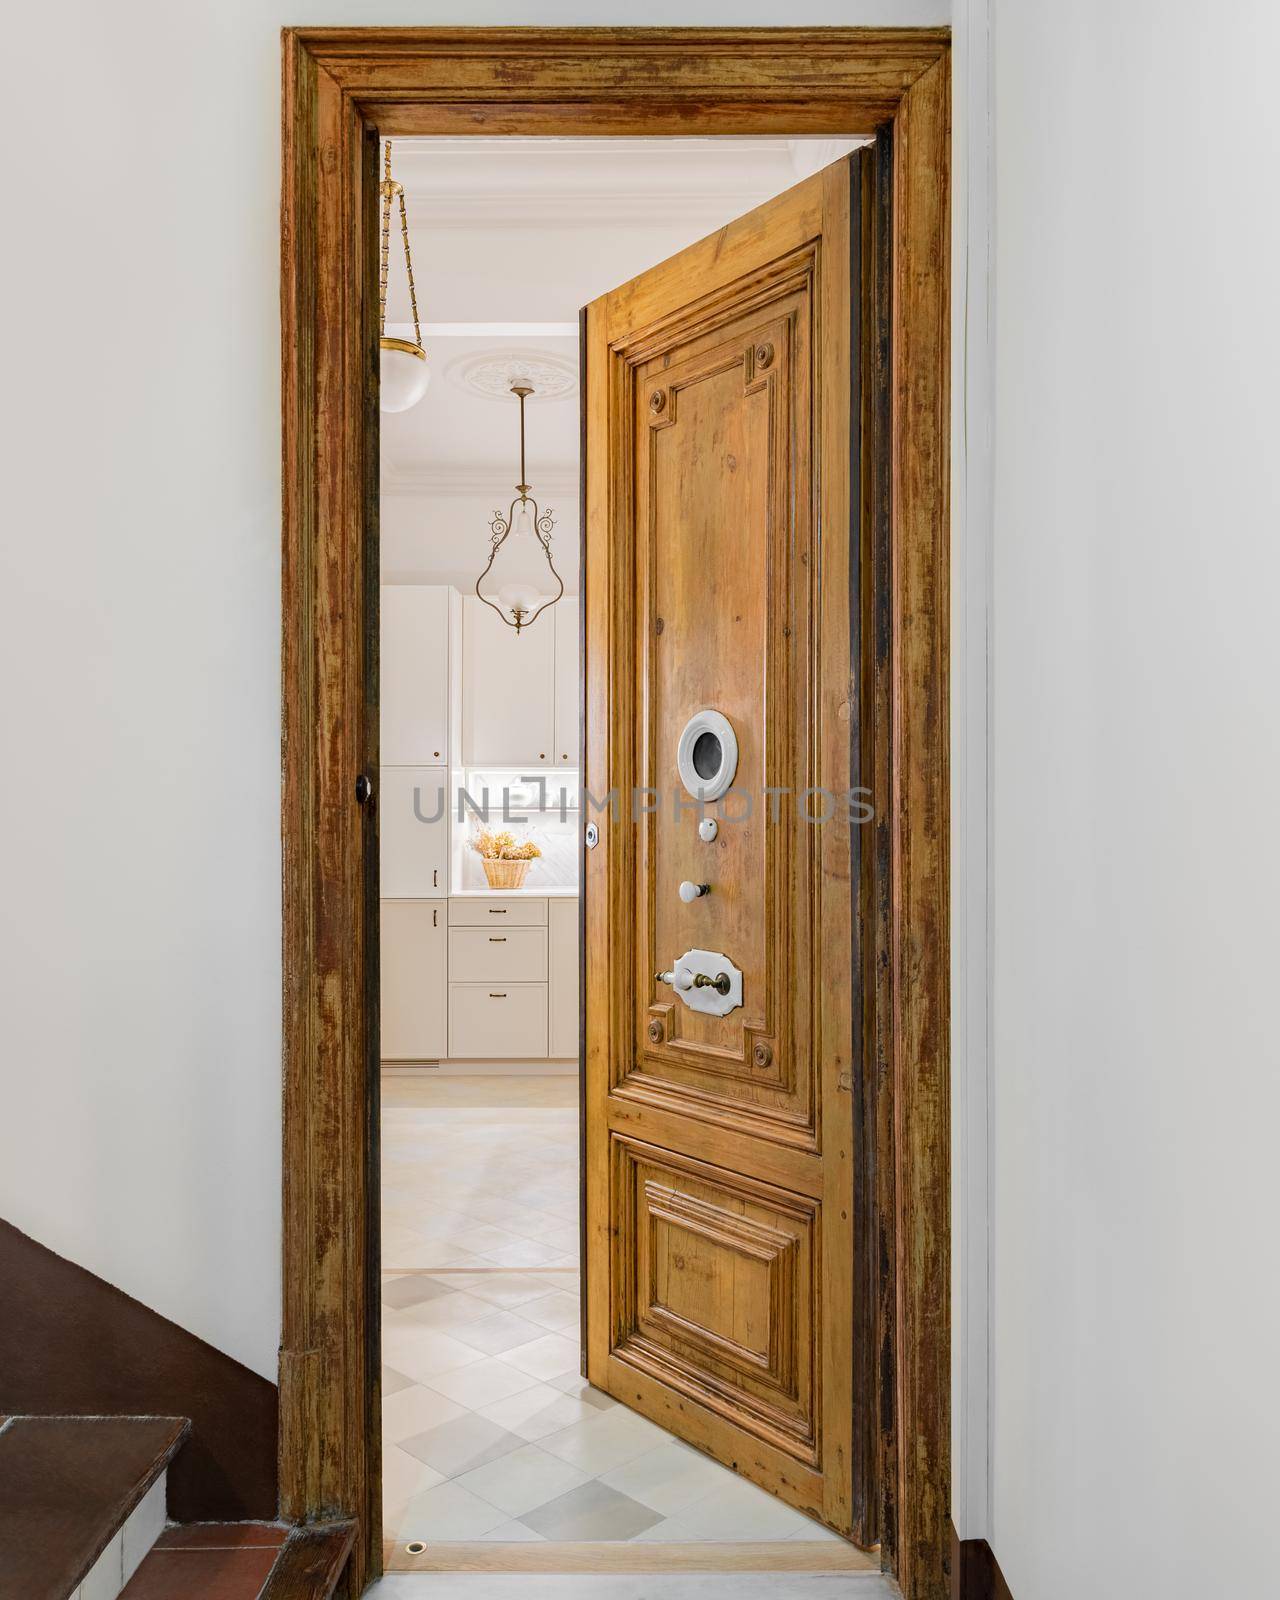 Typical wooden door in a building of old town of Barcelona, Spain. Entrance with opened door to refurbished apartment. by apavlin